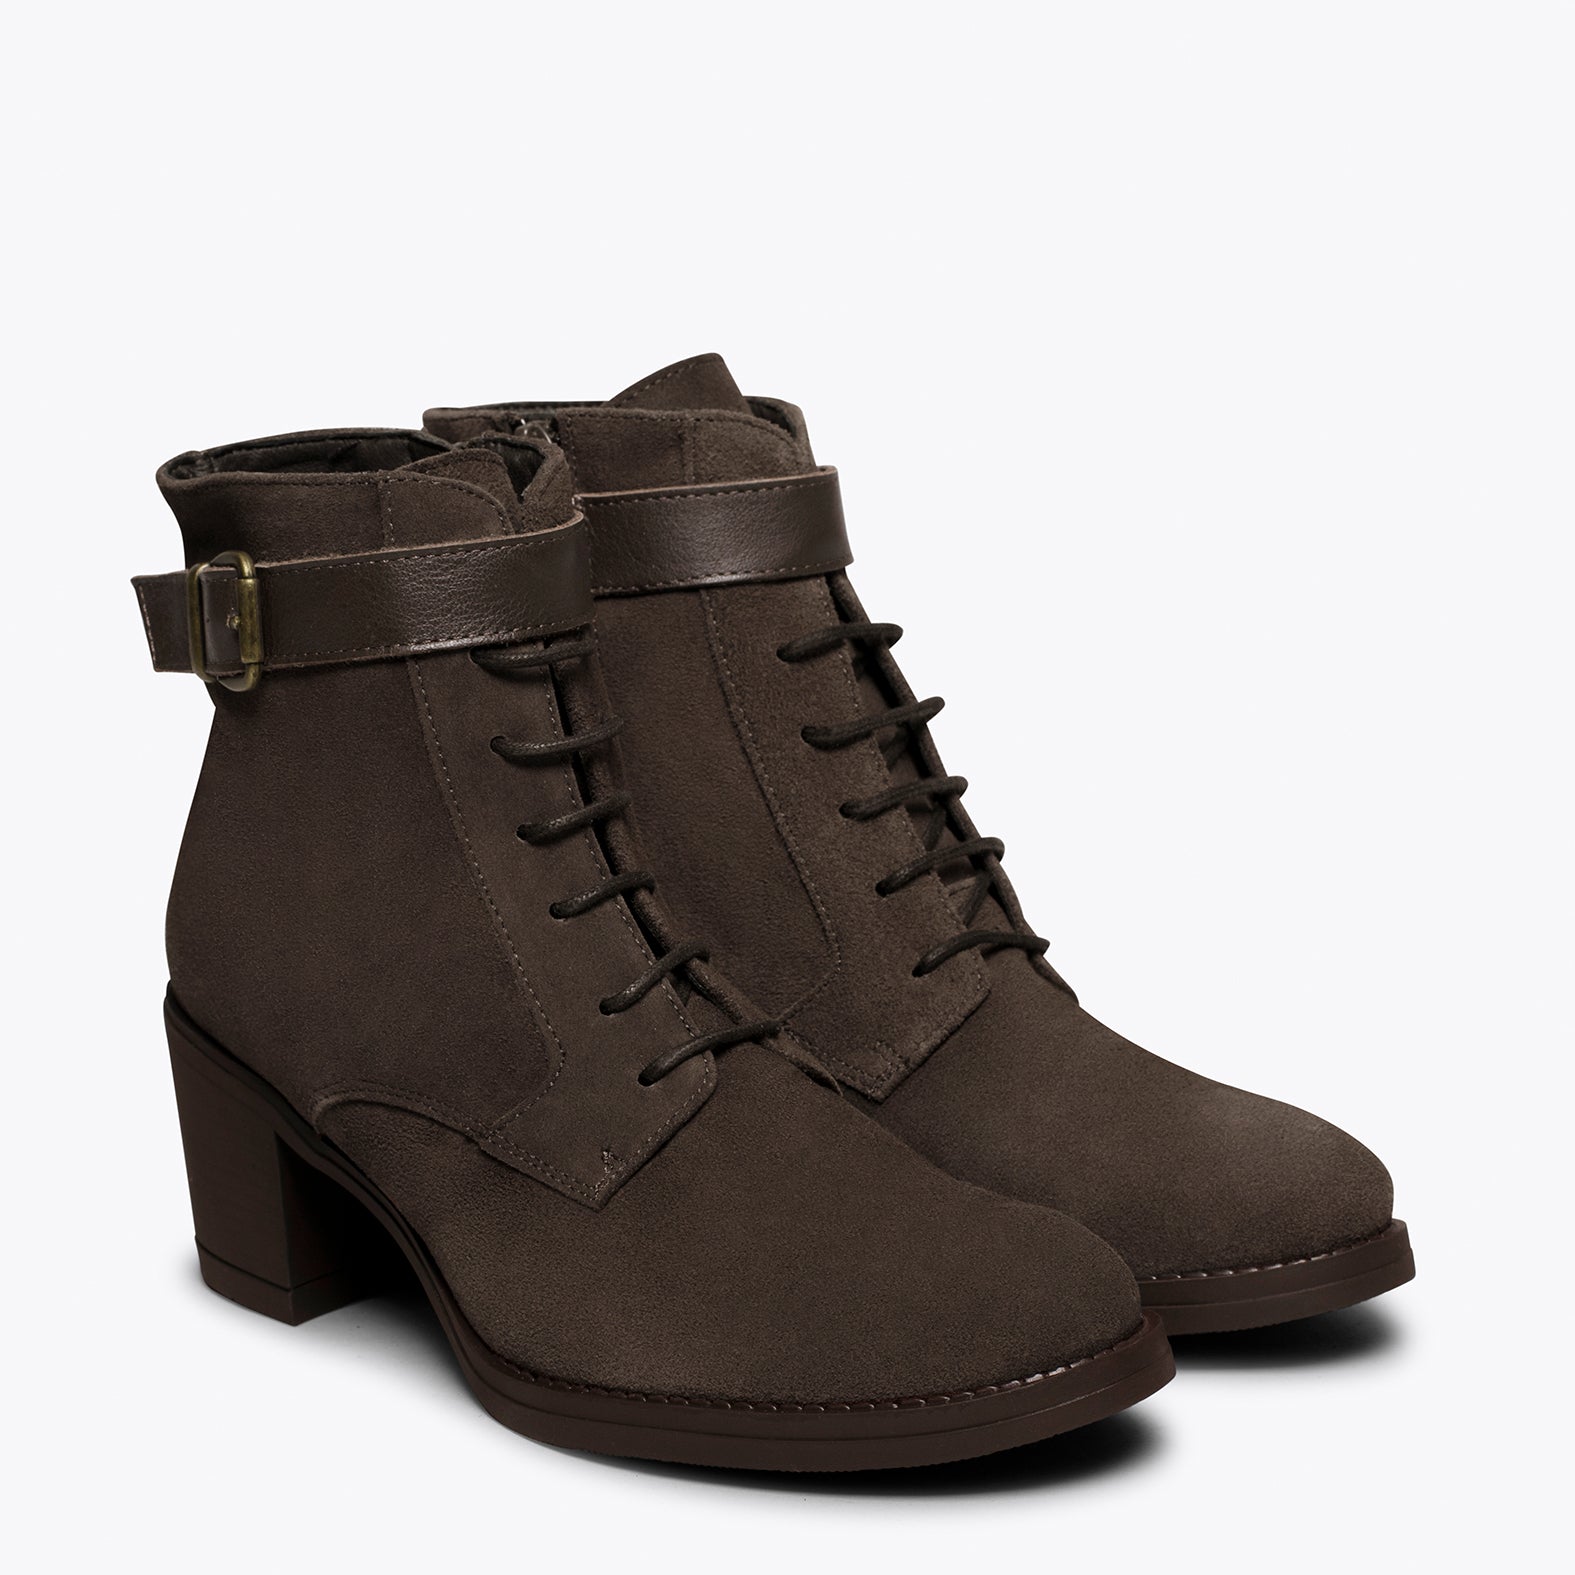 TOP – CHOCOLATE mid heel bootie with laces